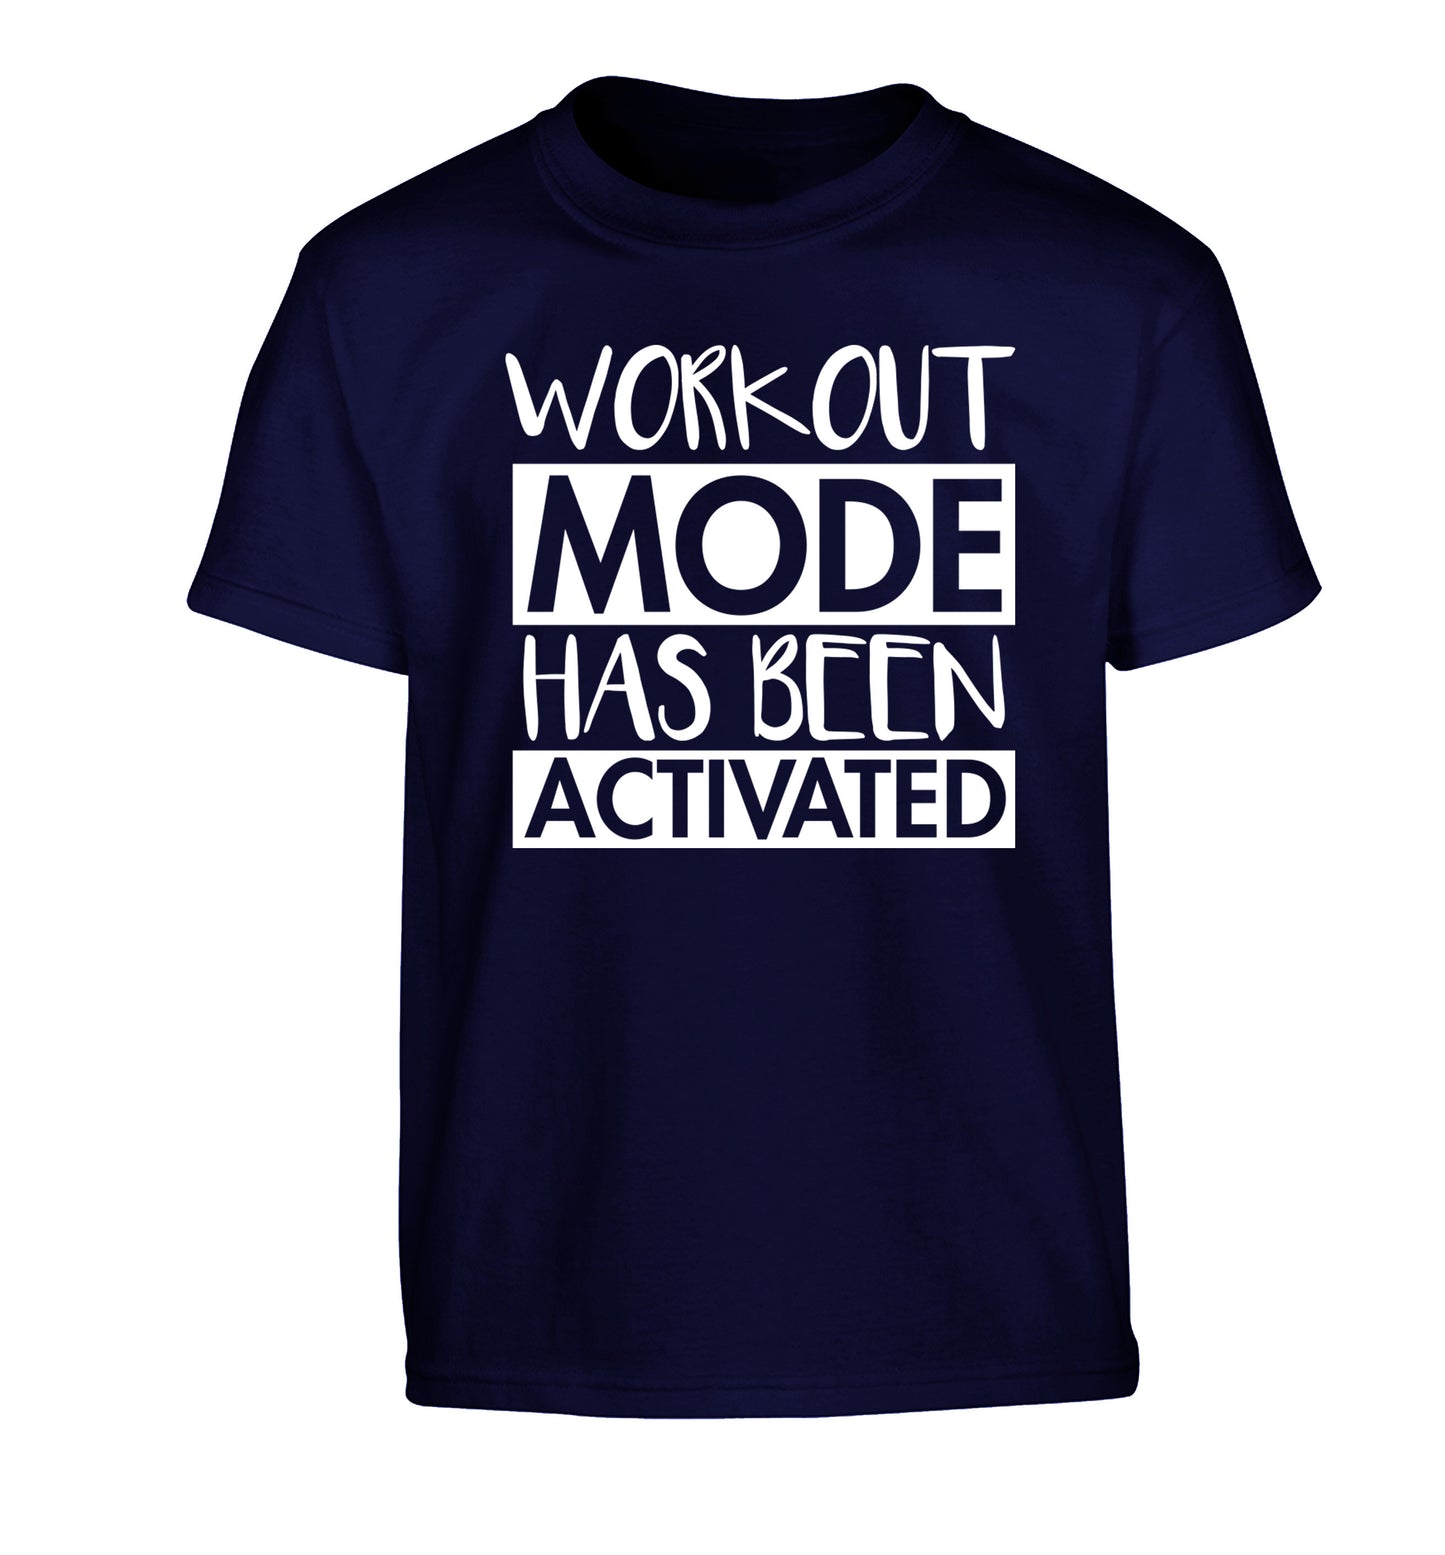 Workout mode has been activated Children's navy Tshirt 12-14 Years